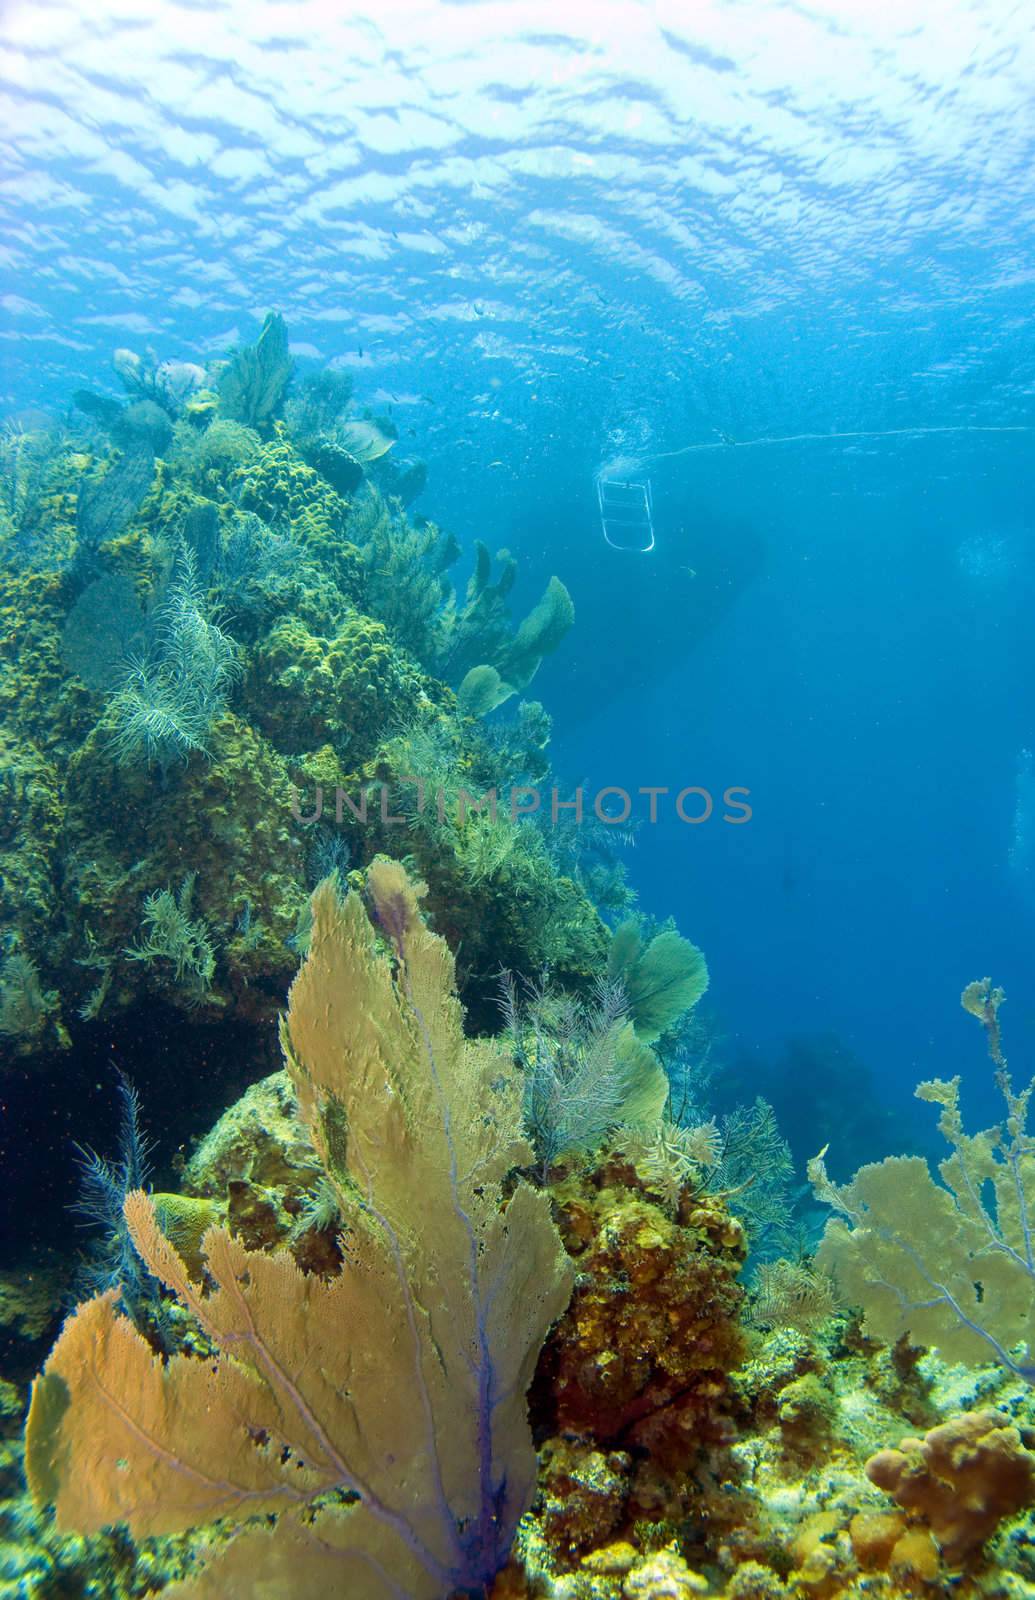 Cayman Brac Reef with dive boat in the background